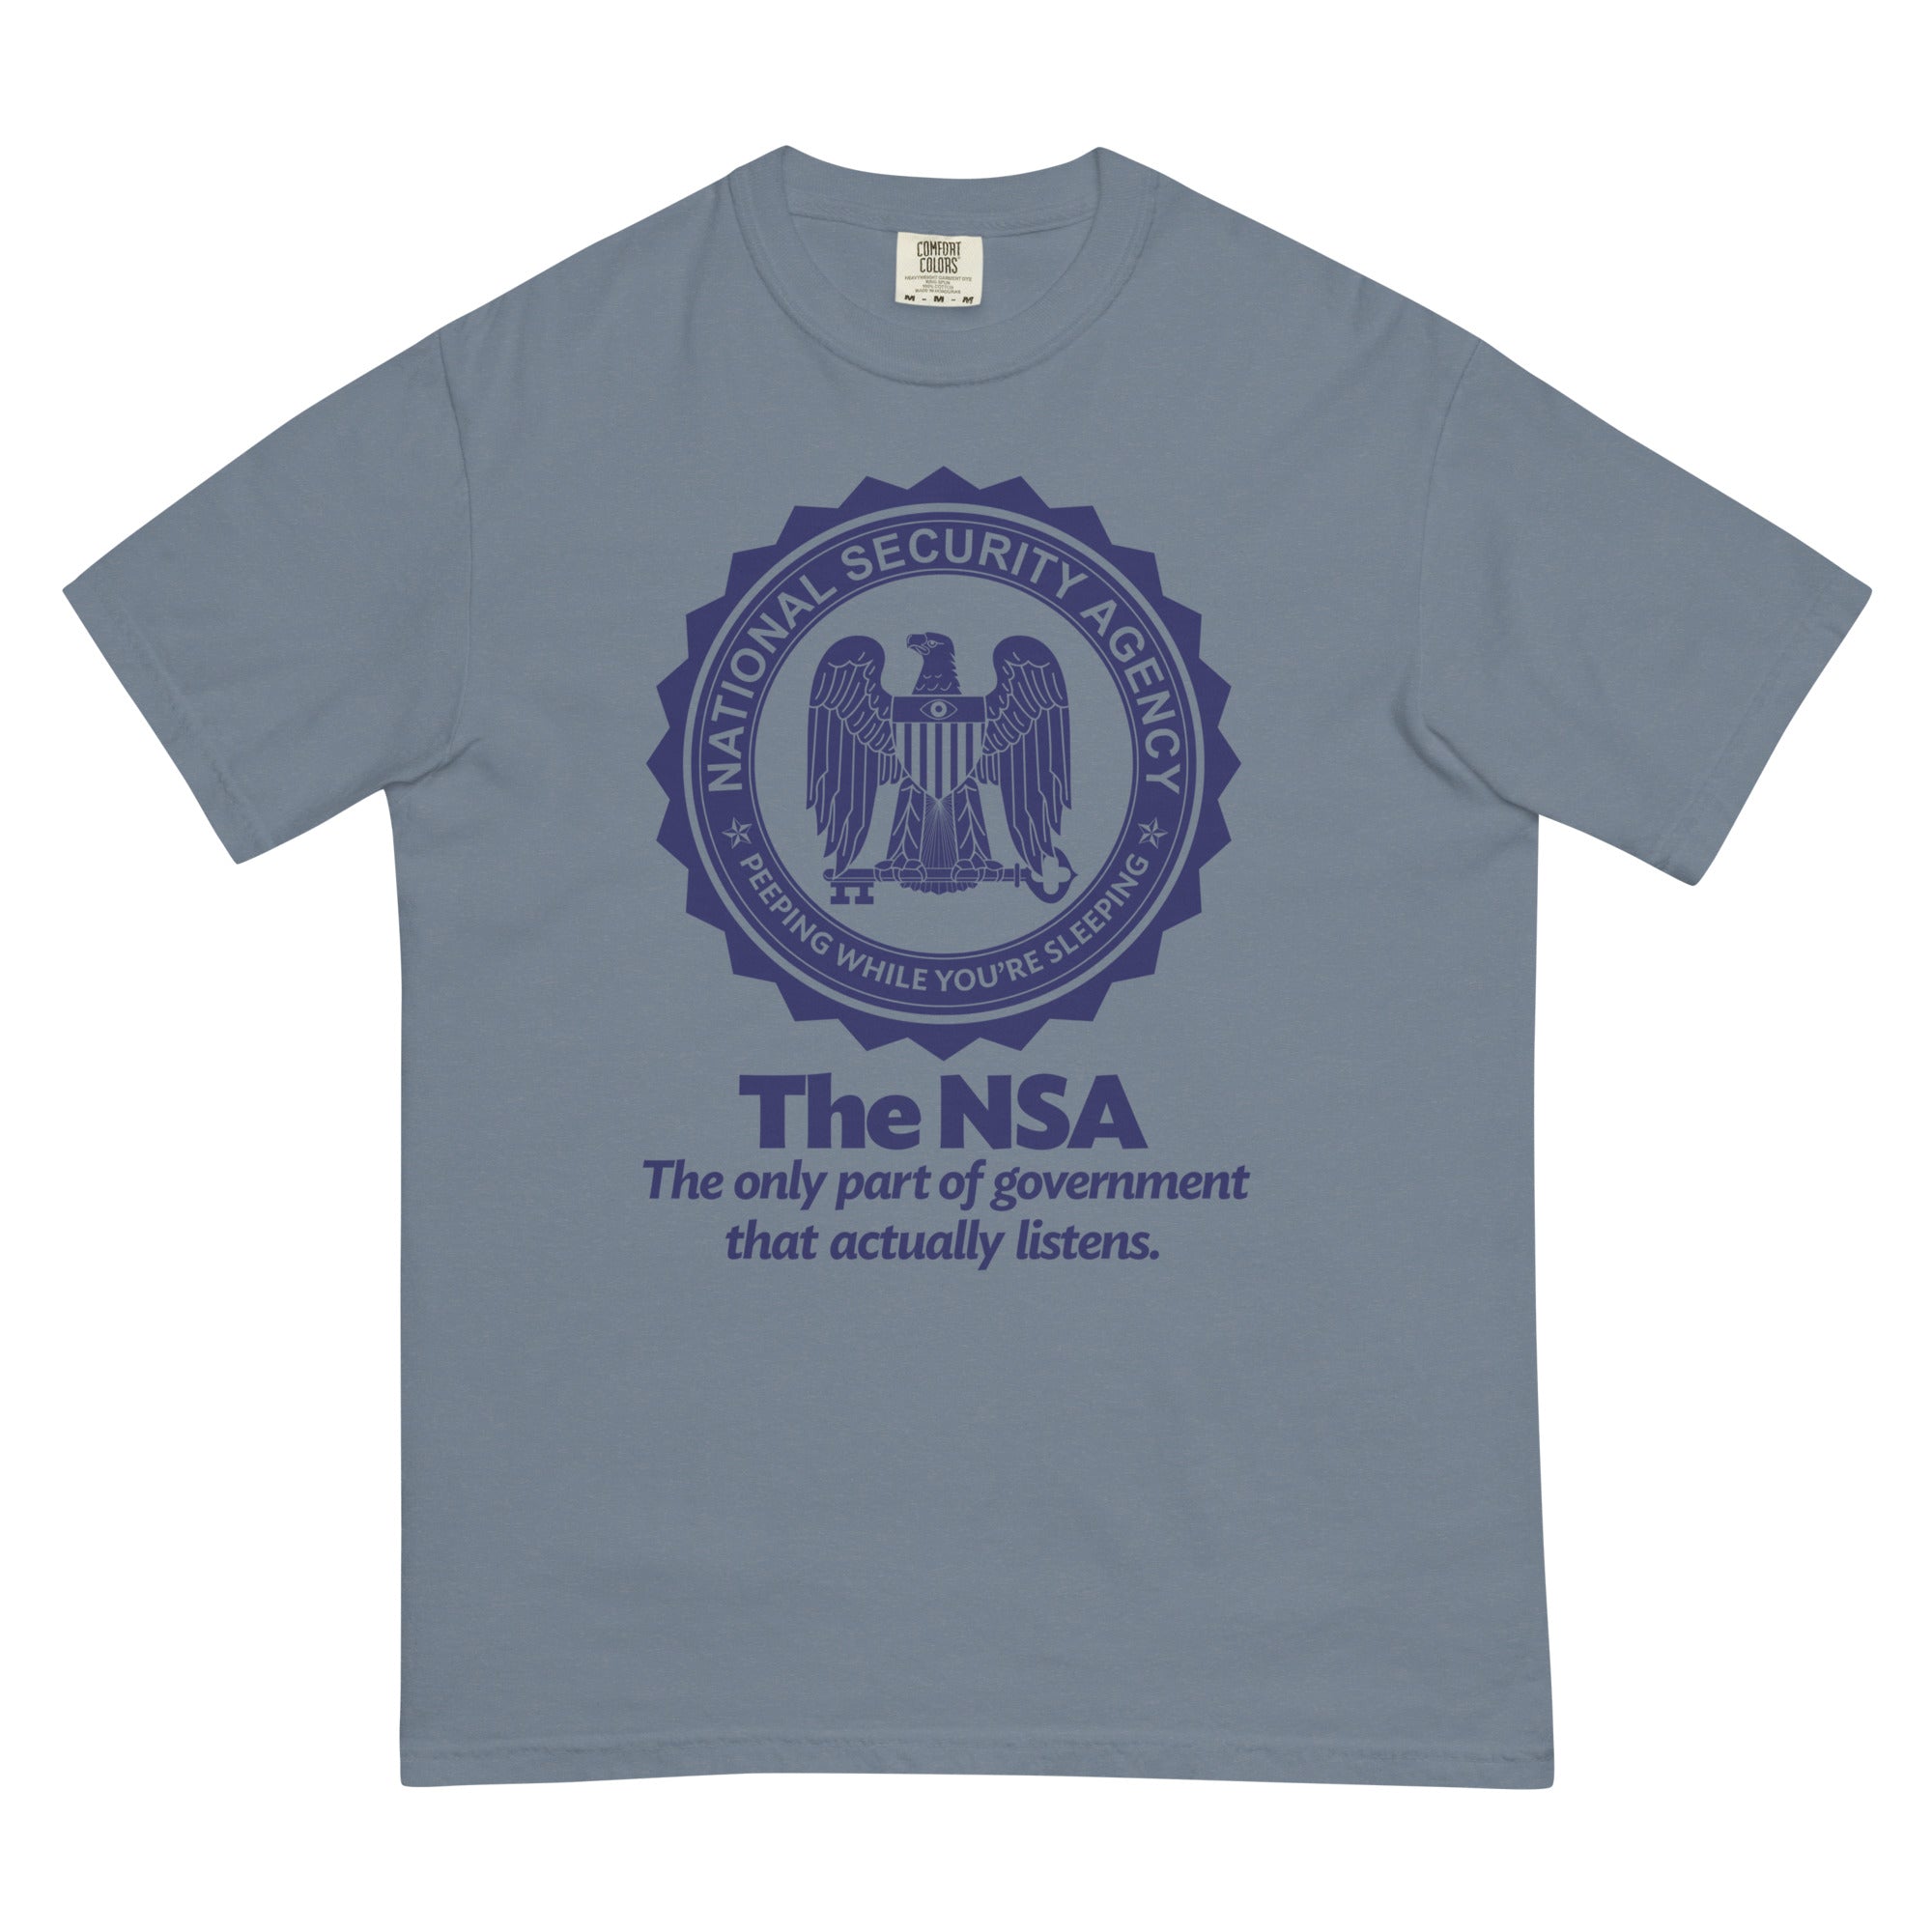 The NSA: The Only Part of Government That Actually Listens Garment-dyed Heavyweight T-Shirt